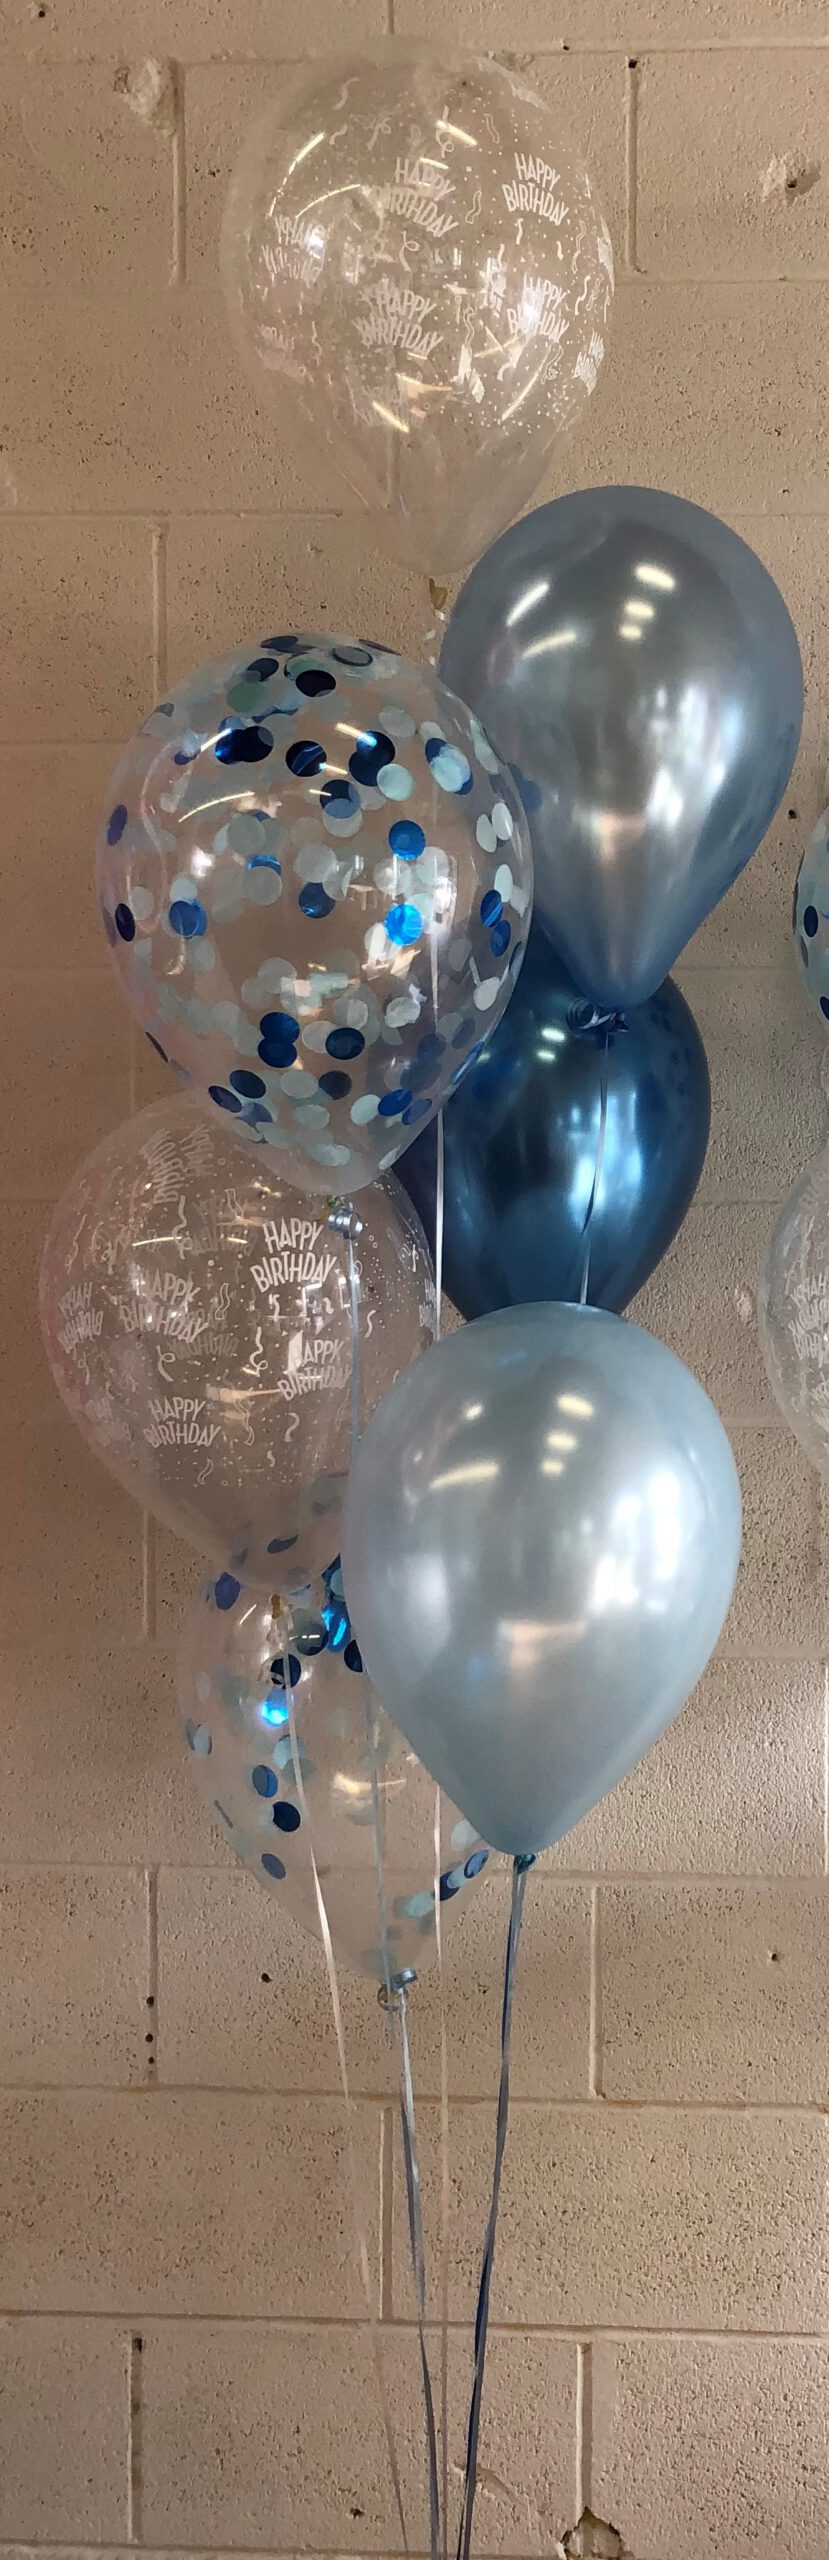 https://partiesnmore.ca/wp-content/uploads/2021/01/group-of-7-with-chrome-clear-and-confetti-balloons-2-scaled.jpg